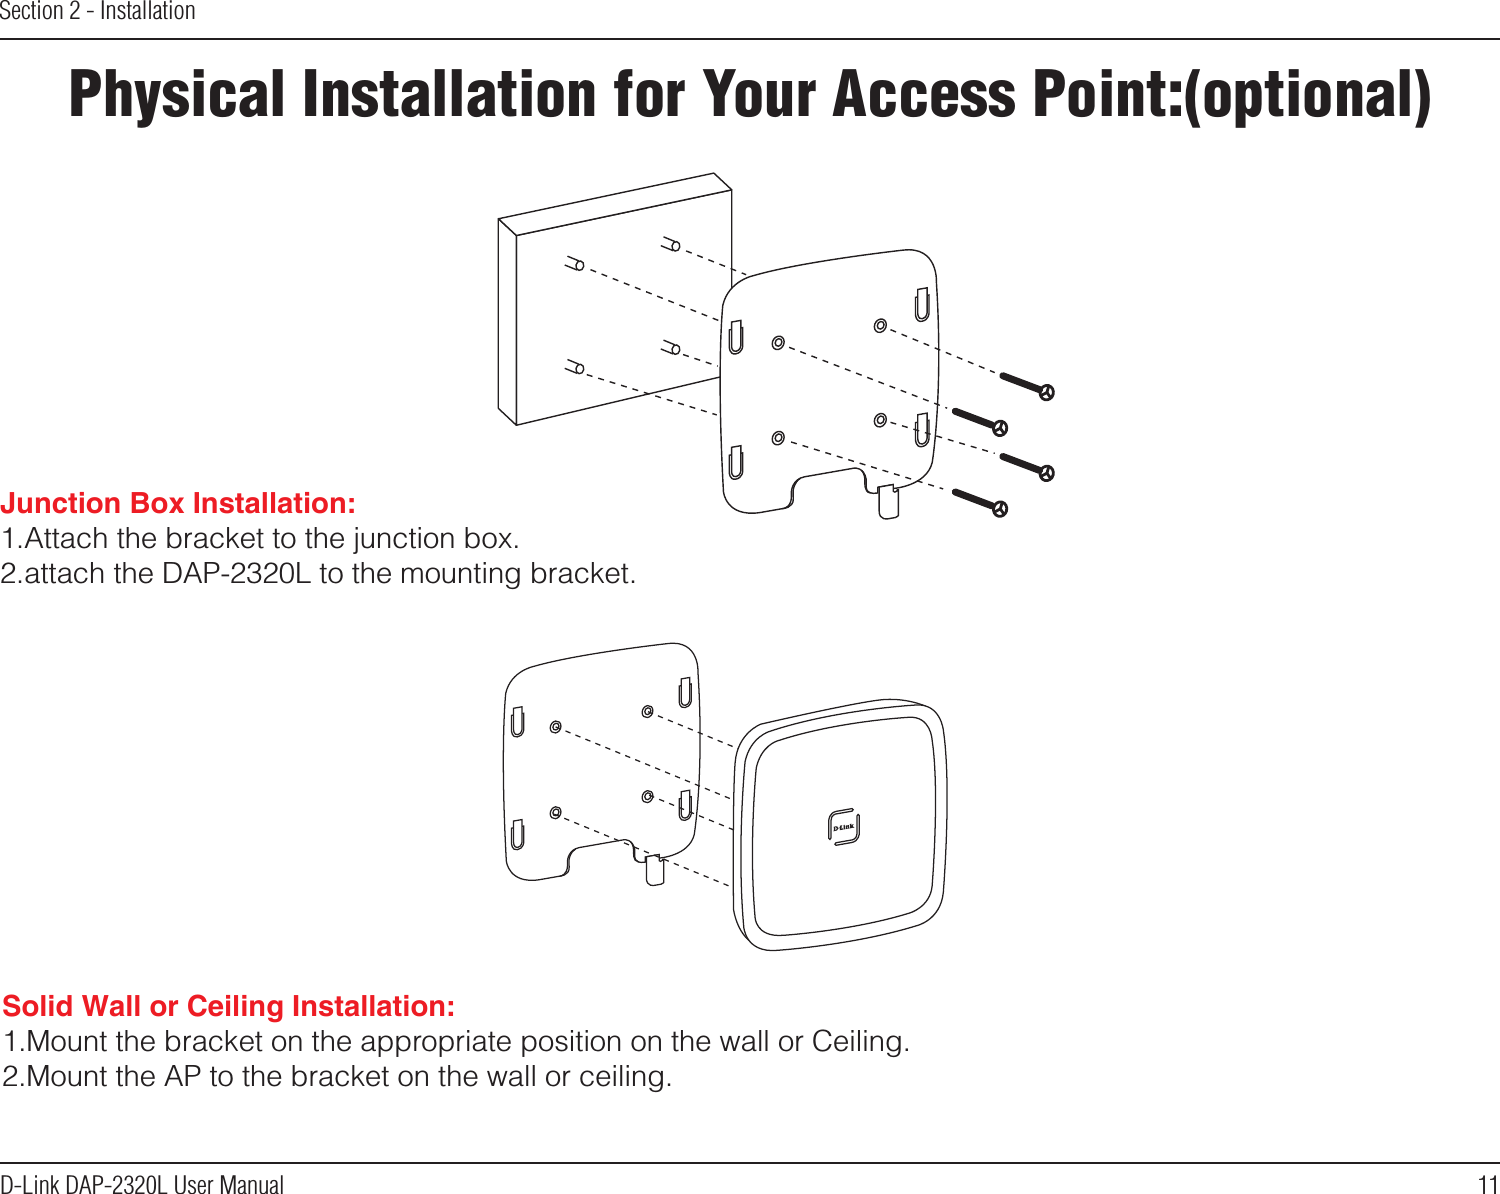 11D-Link DAP-2320L User ManualSection 2 - InstallationPhysical Installation for Your Access Point:(optional)Solid Wall or Ceiling Installation: 1.Mount the bracket on the appropriate position on the wall or Ceiling.2.Mount the AP to the bracket on the wall or ceiling.Junction Box Installation: 1.Attach the bracket to the junction box.2.attach the DAP-2320L to the mounting bracket. 